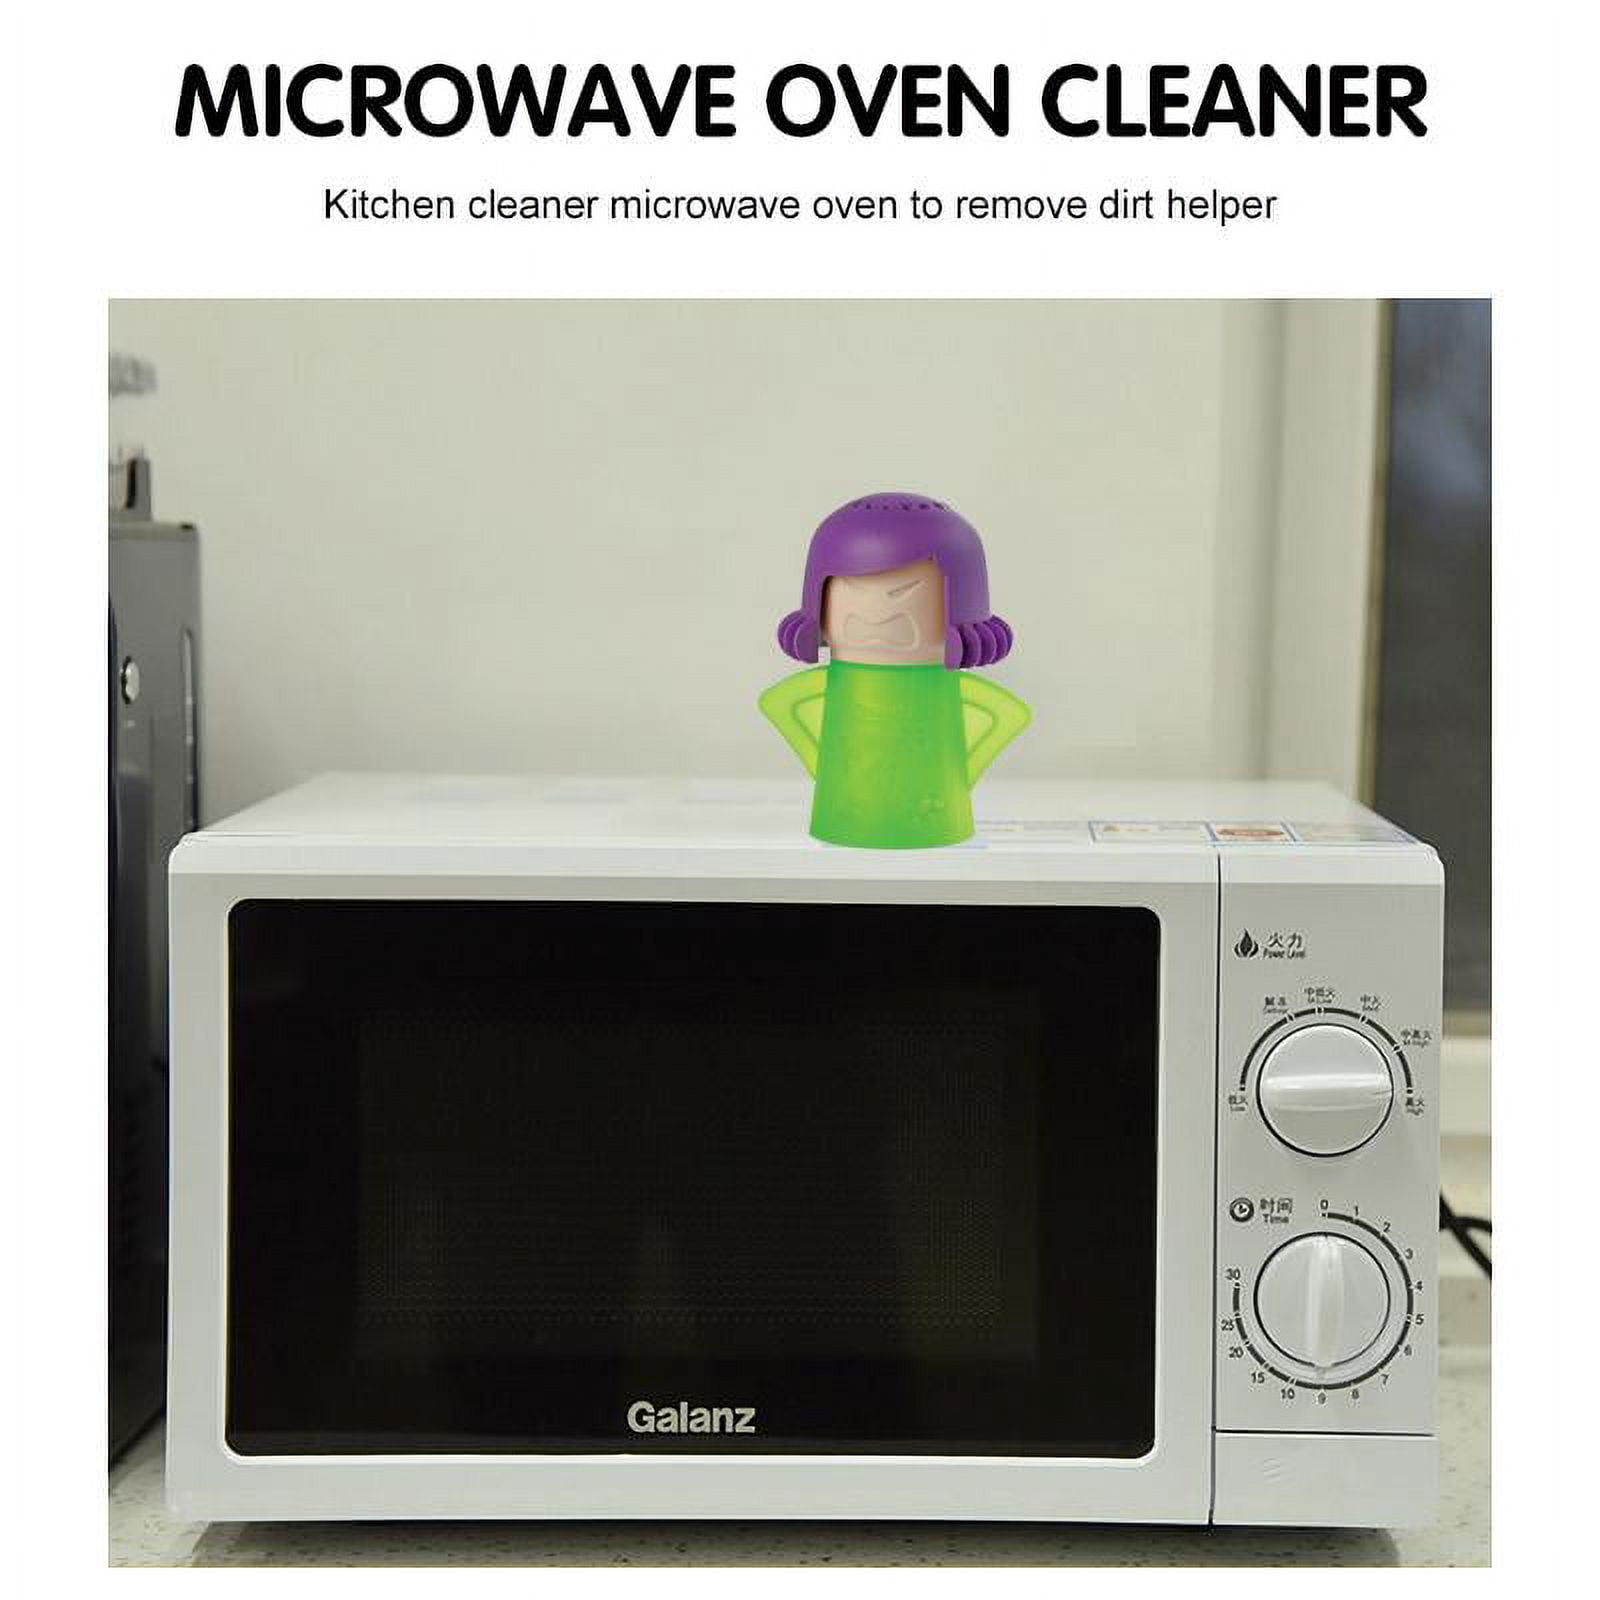 Angry Mama Microwave Oven Cleaner – The Weddinglogy